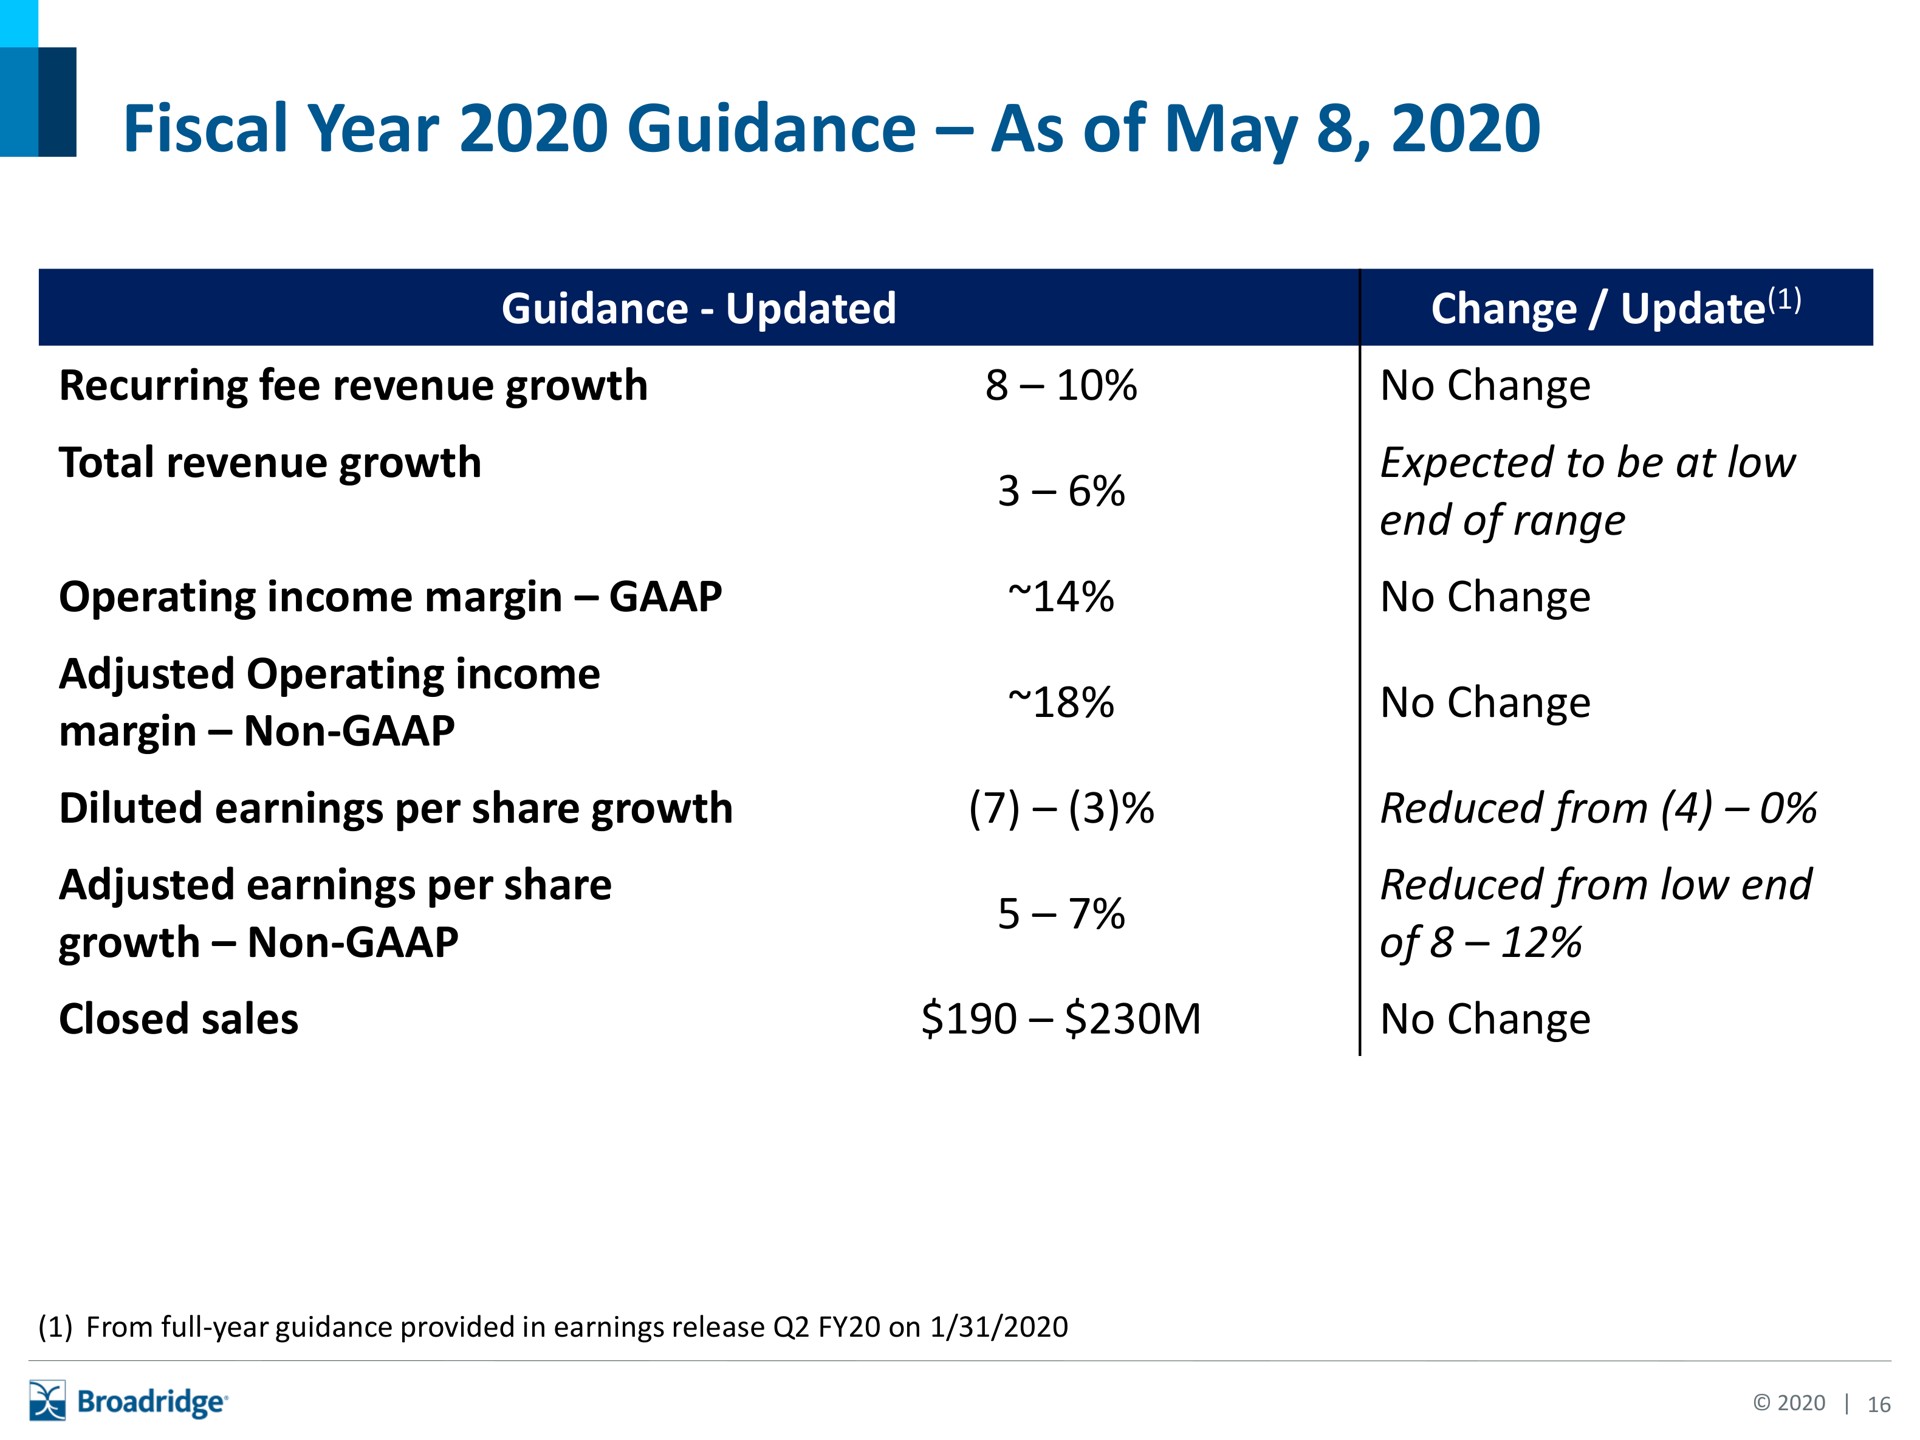 fiscal year guidance as of may i | Broadridge Financial Solutions